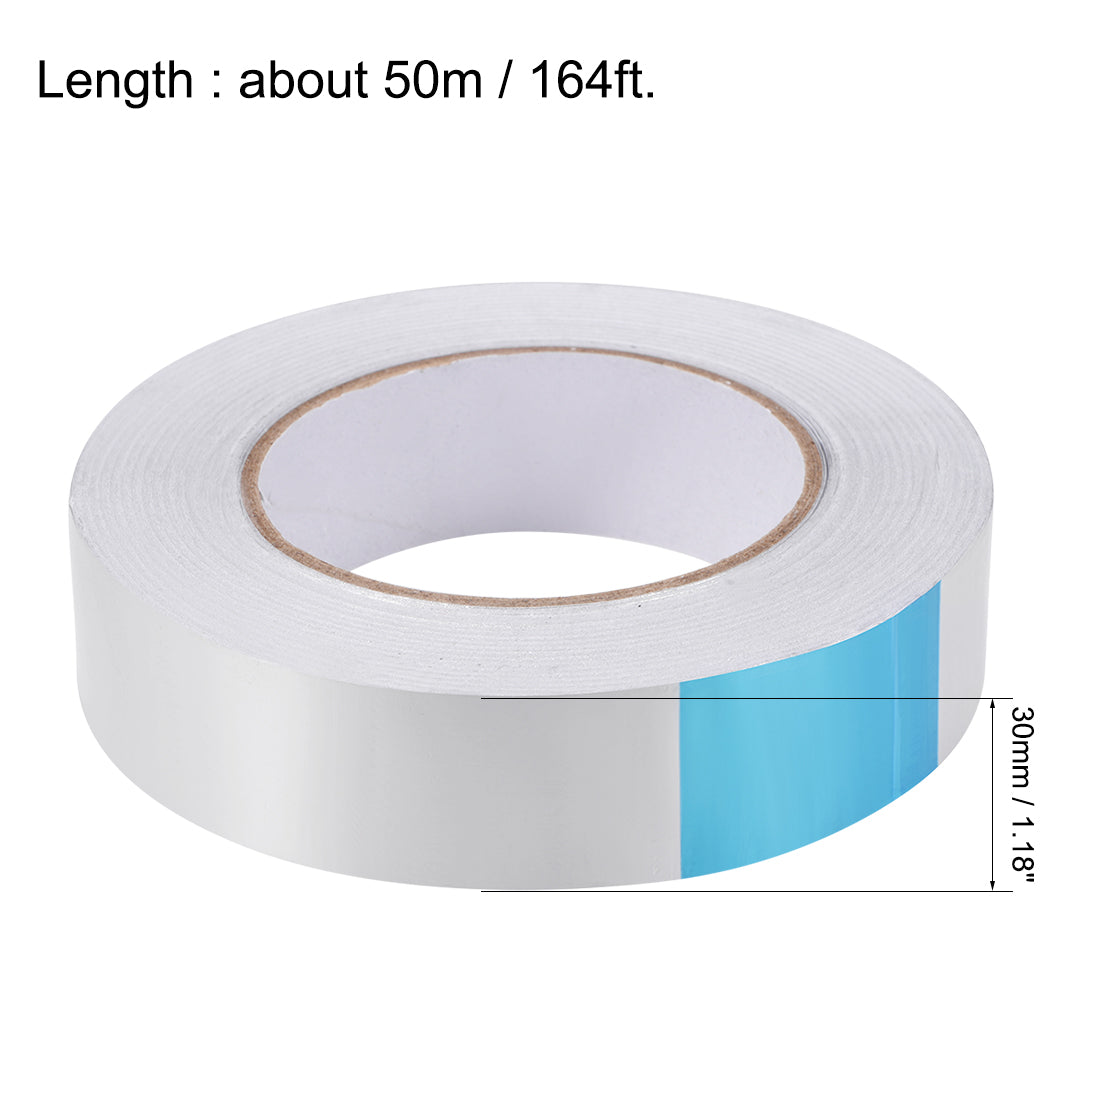 uxcell Uxcell Heat Resistant Tape - High Temperature Heat Transfer Tape Aluminum Foil Adhesive Tape 30mm x 50m(164ft)